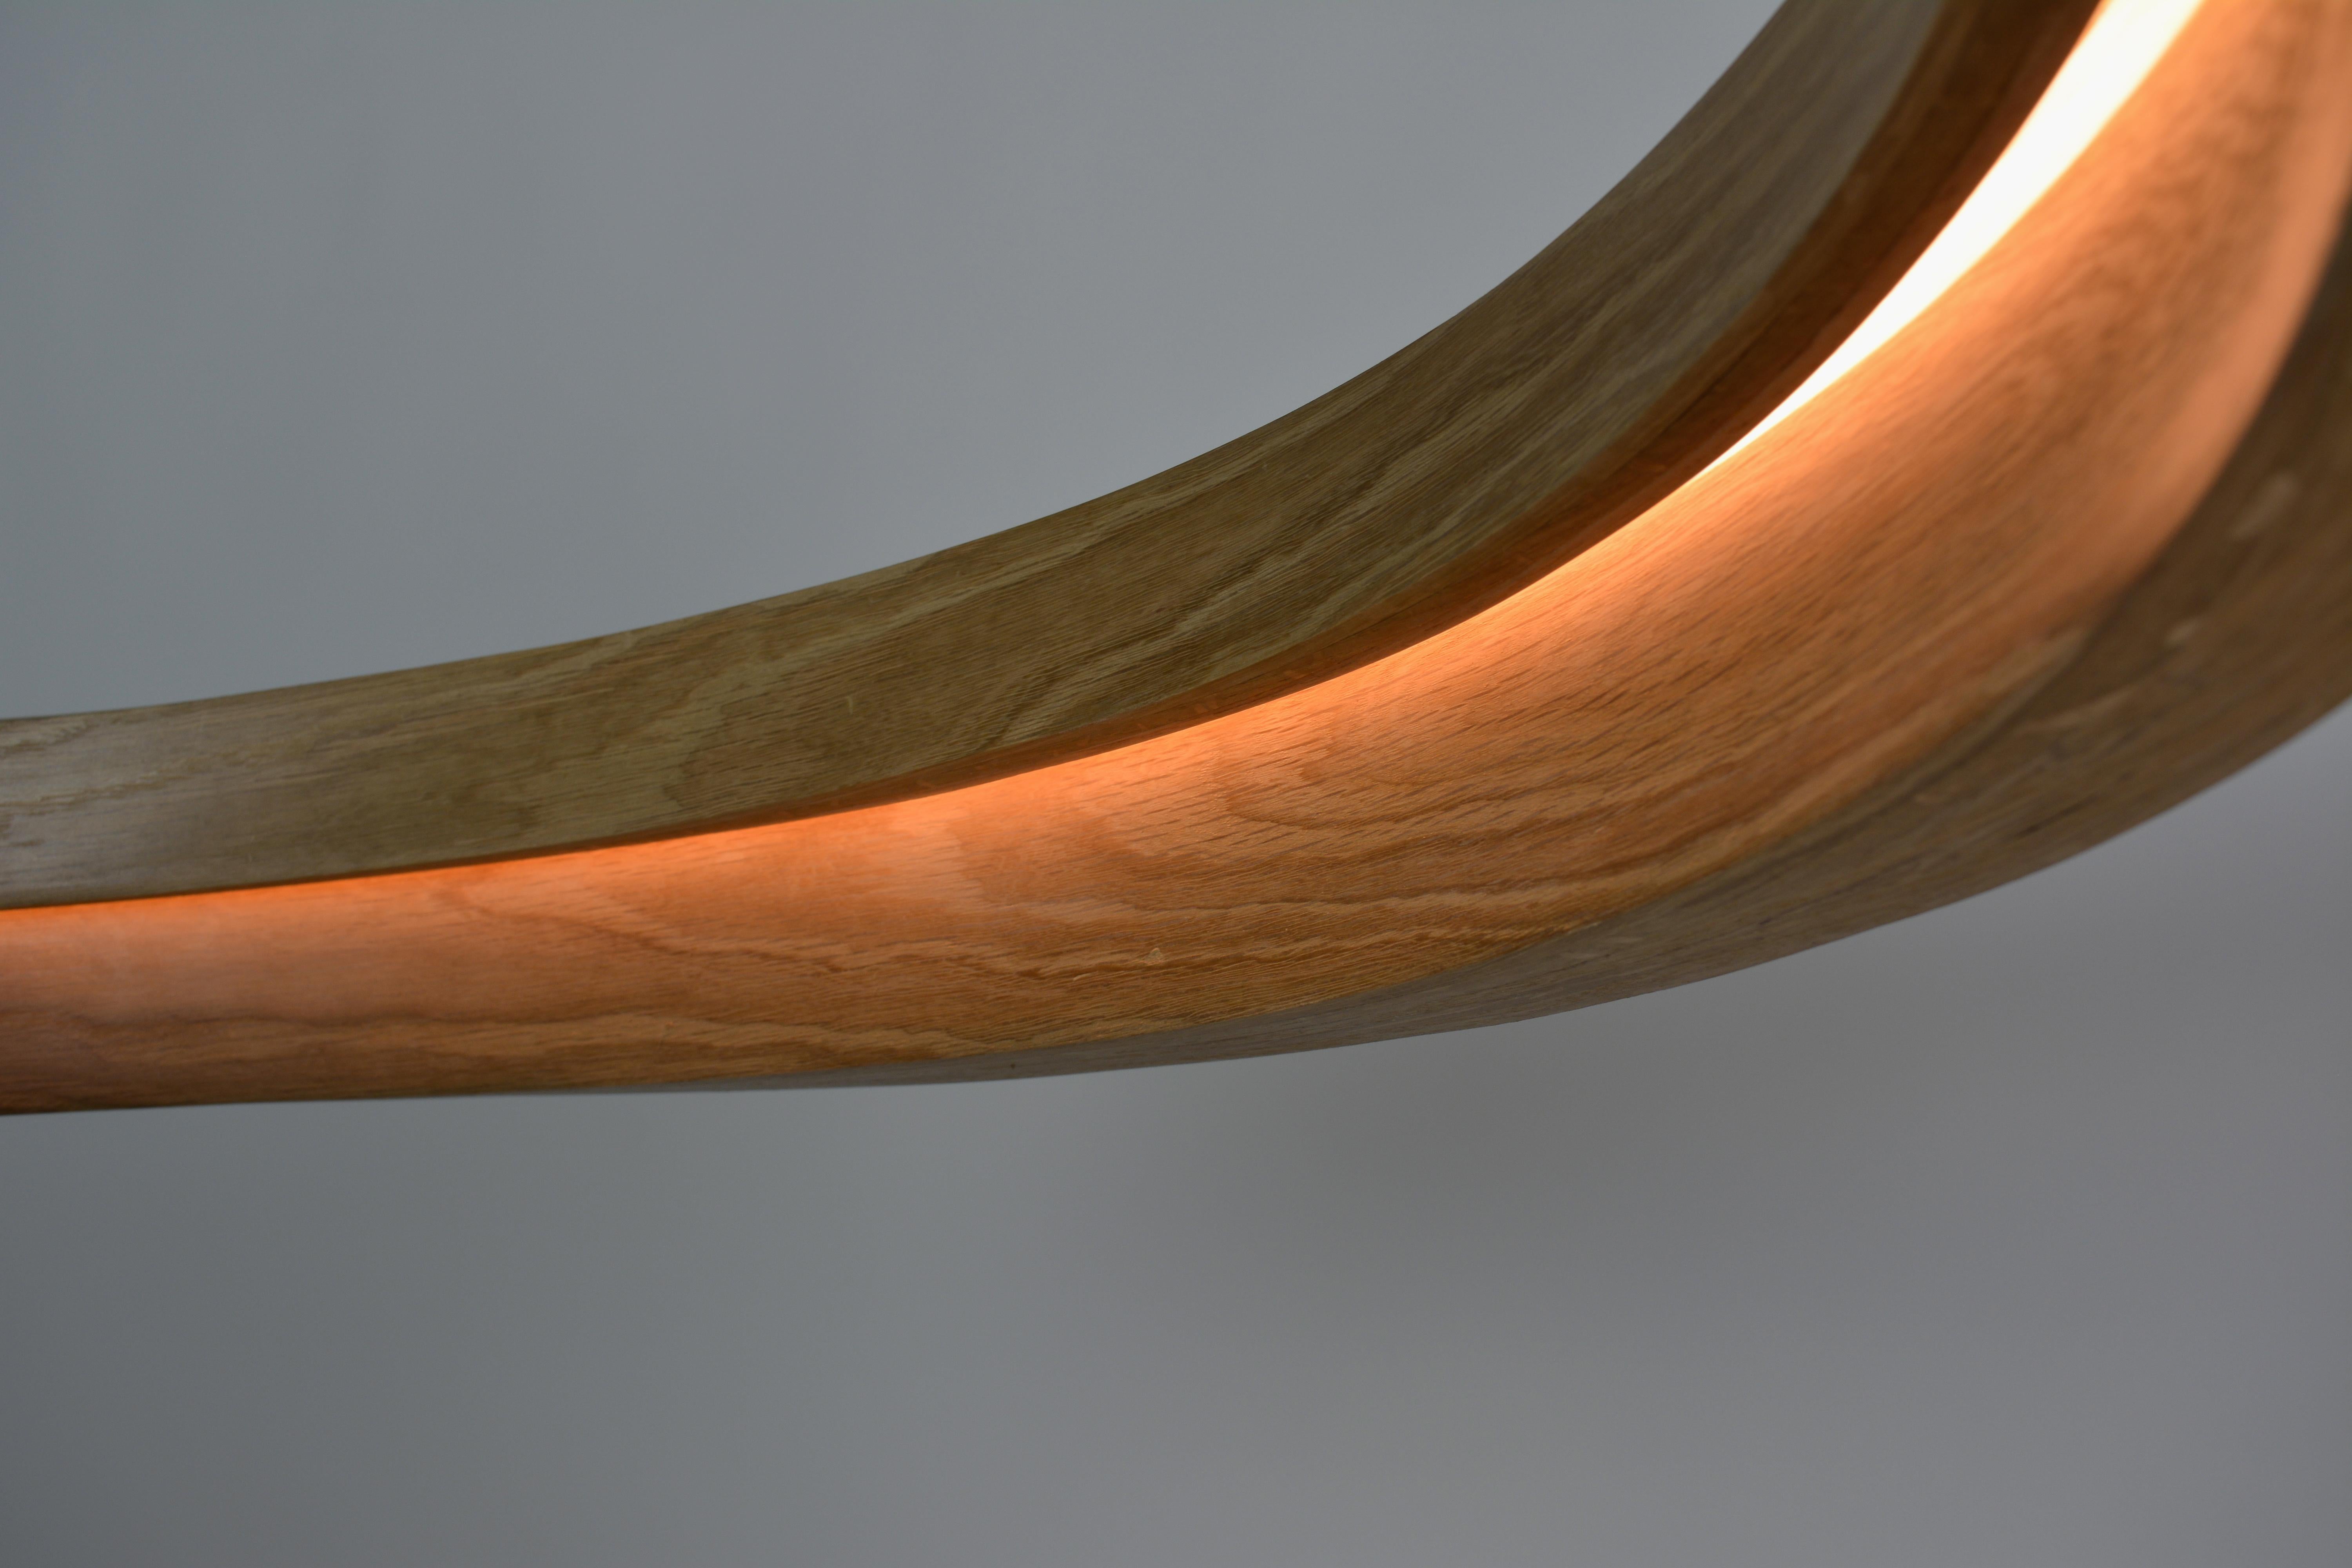 American Invert, Curved Wooden Pendant Light with Warm LED Back-Lit Glow